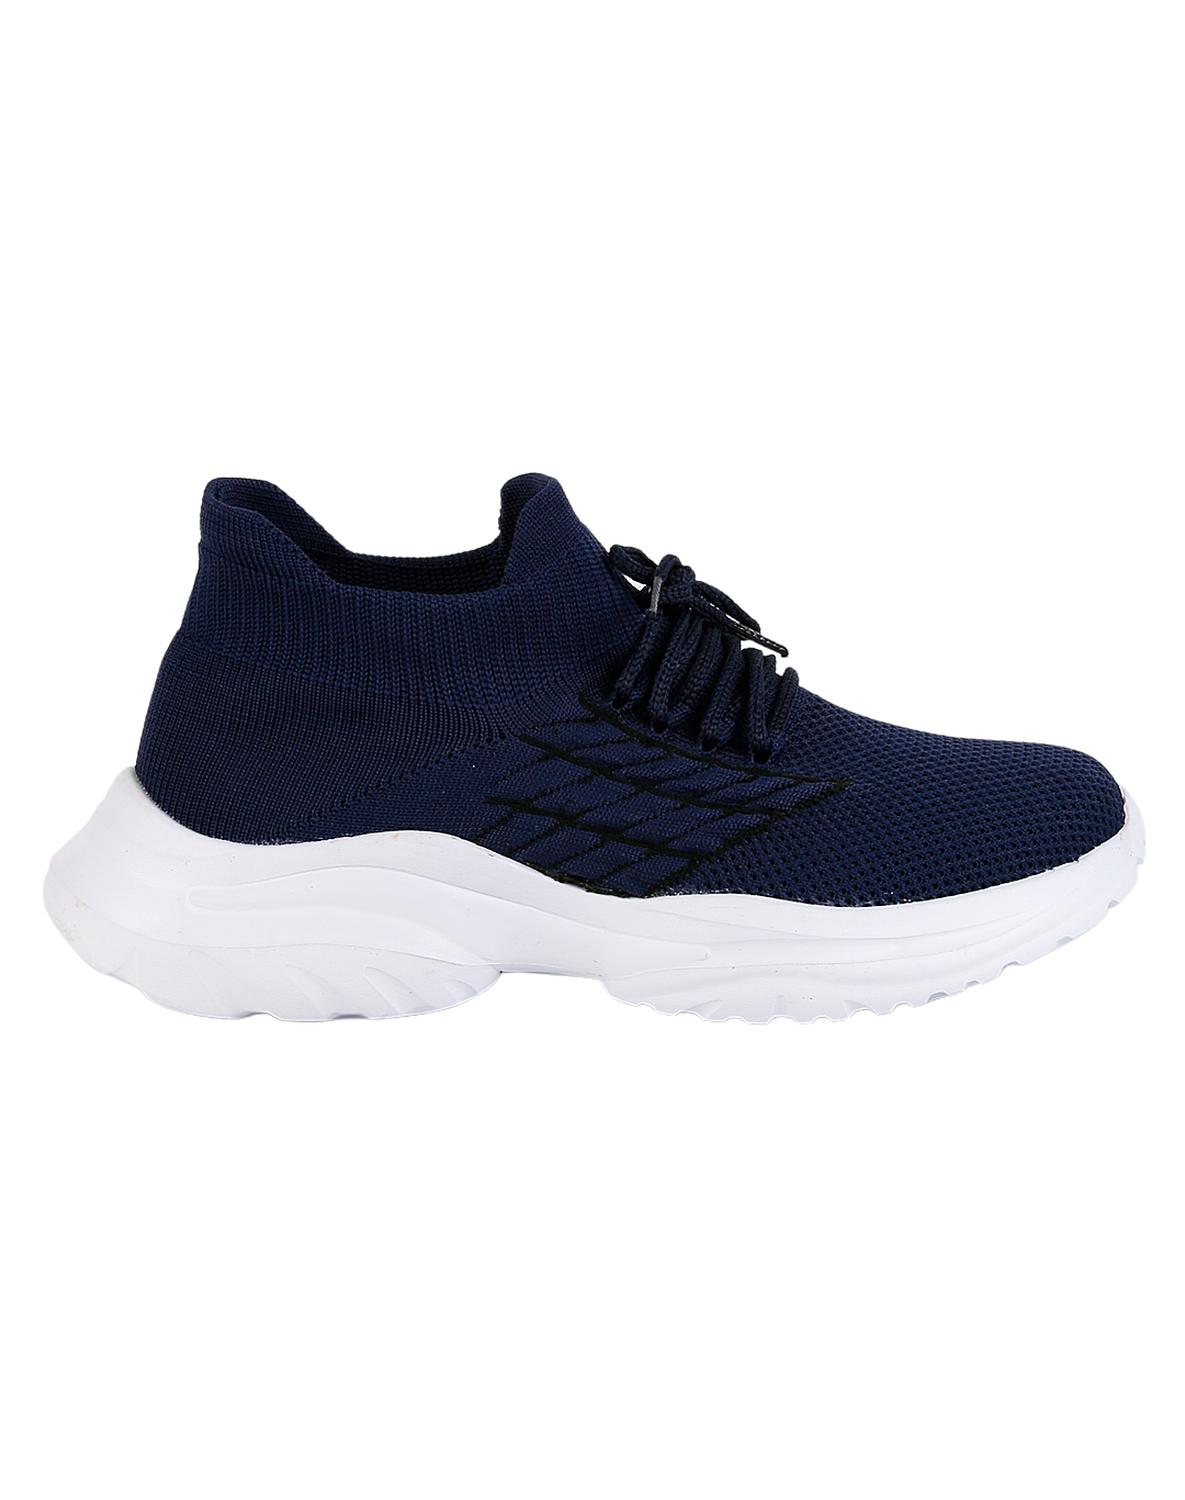 Tenis Casual Piso Mujer Azul Textil Stfashion 14103801